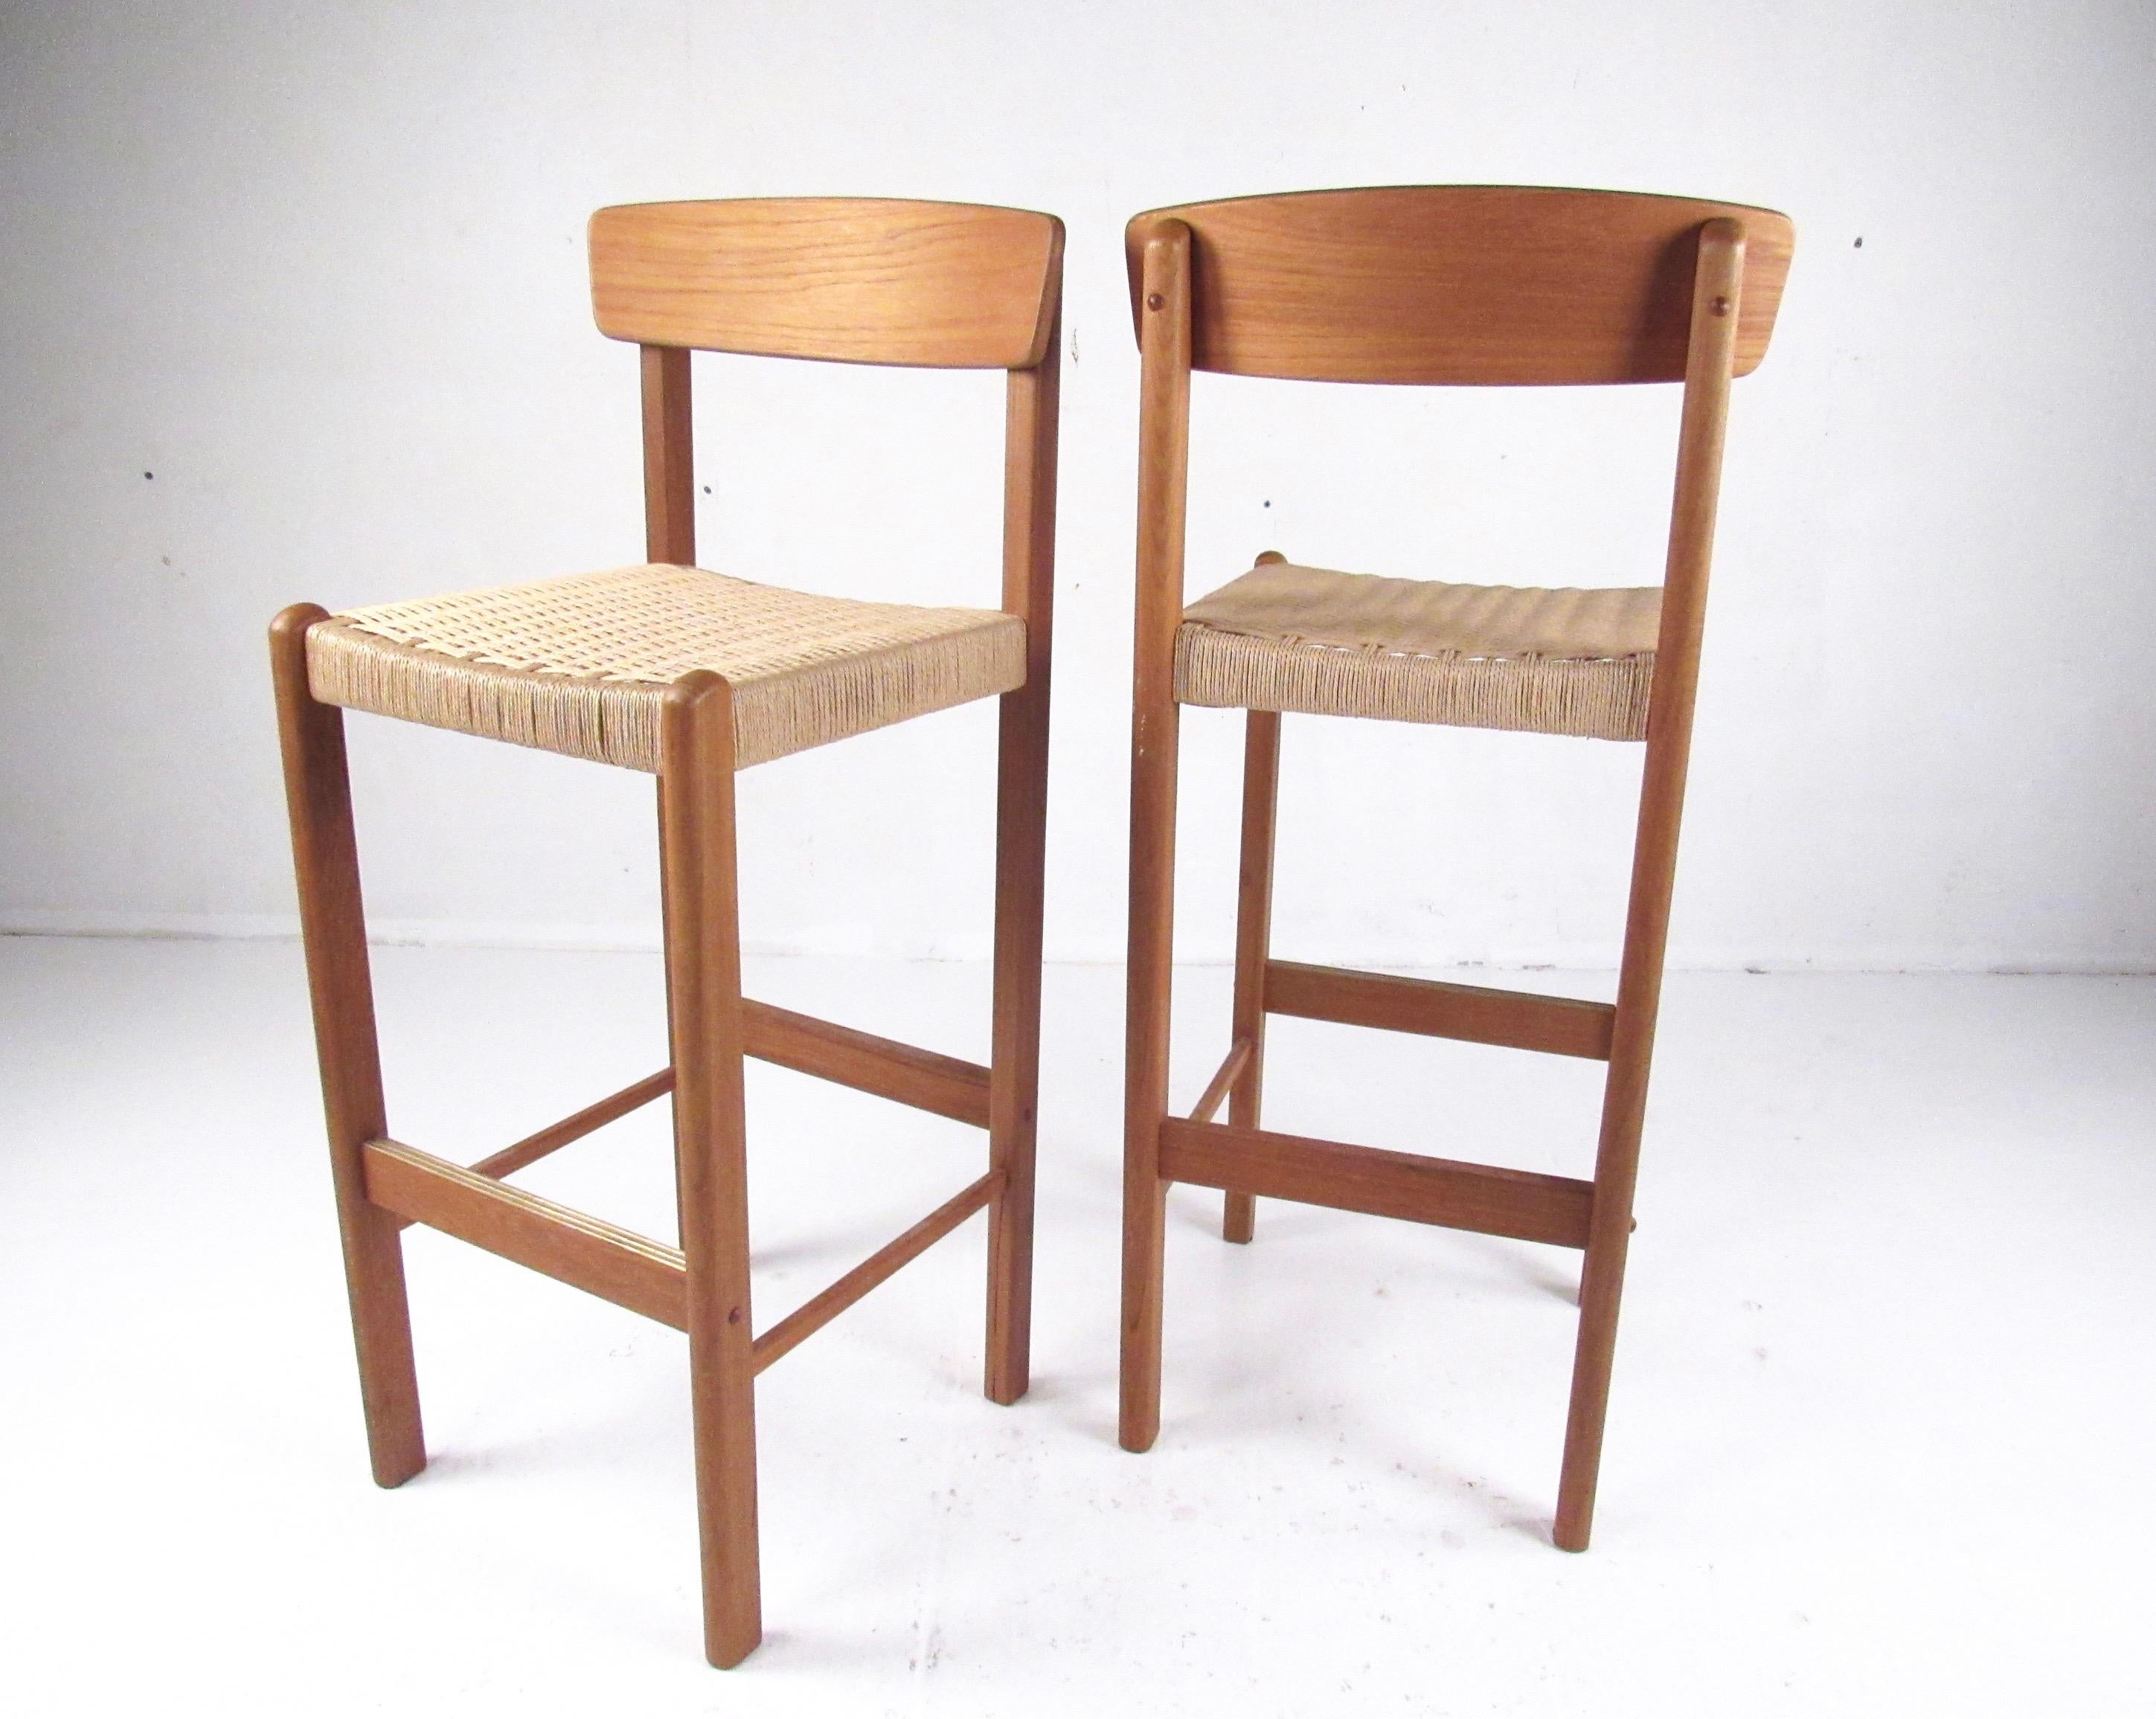 This beautiful pair of modern teak bar stools features Scandinavian style design, sturdy construction, and a stylish mix of hardwood and paper cord. An elegant midcentury style addition to home or business bar or counter seating arrangement. Please